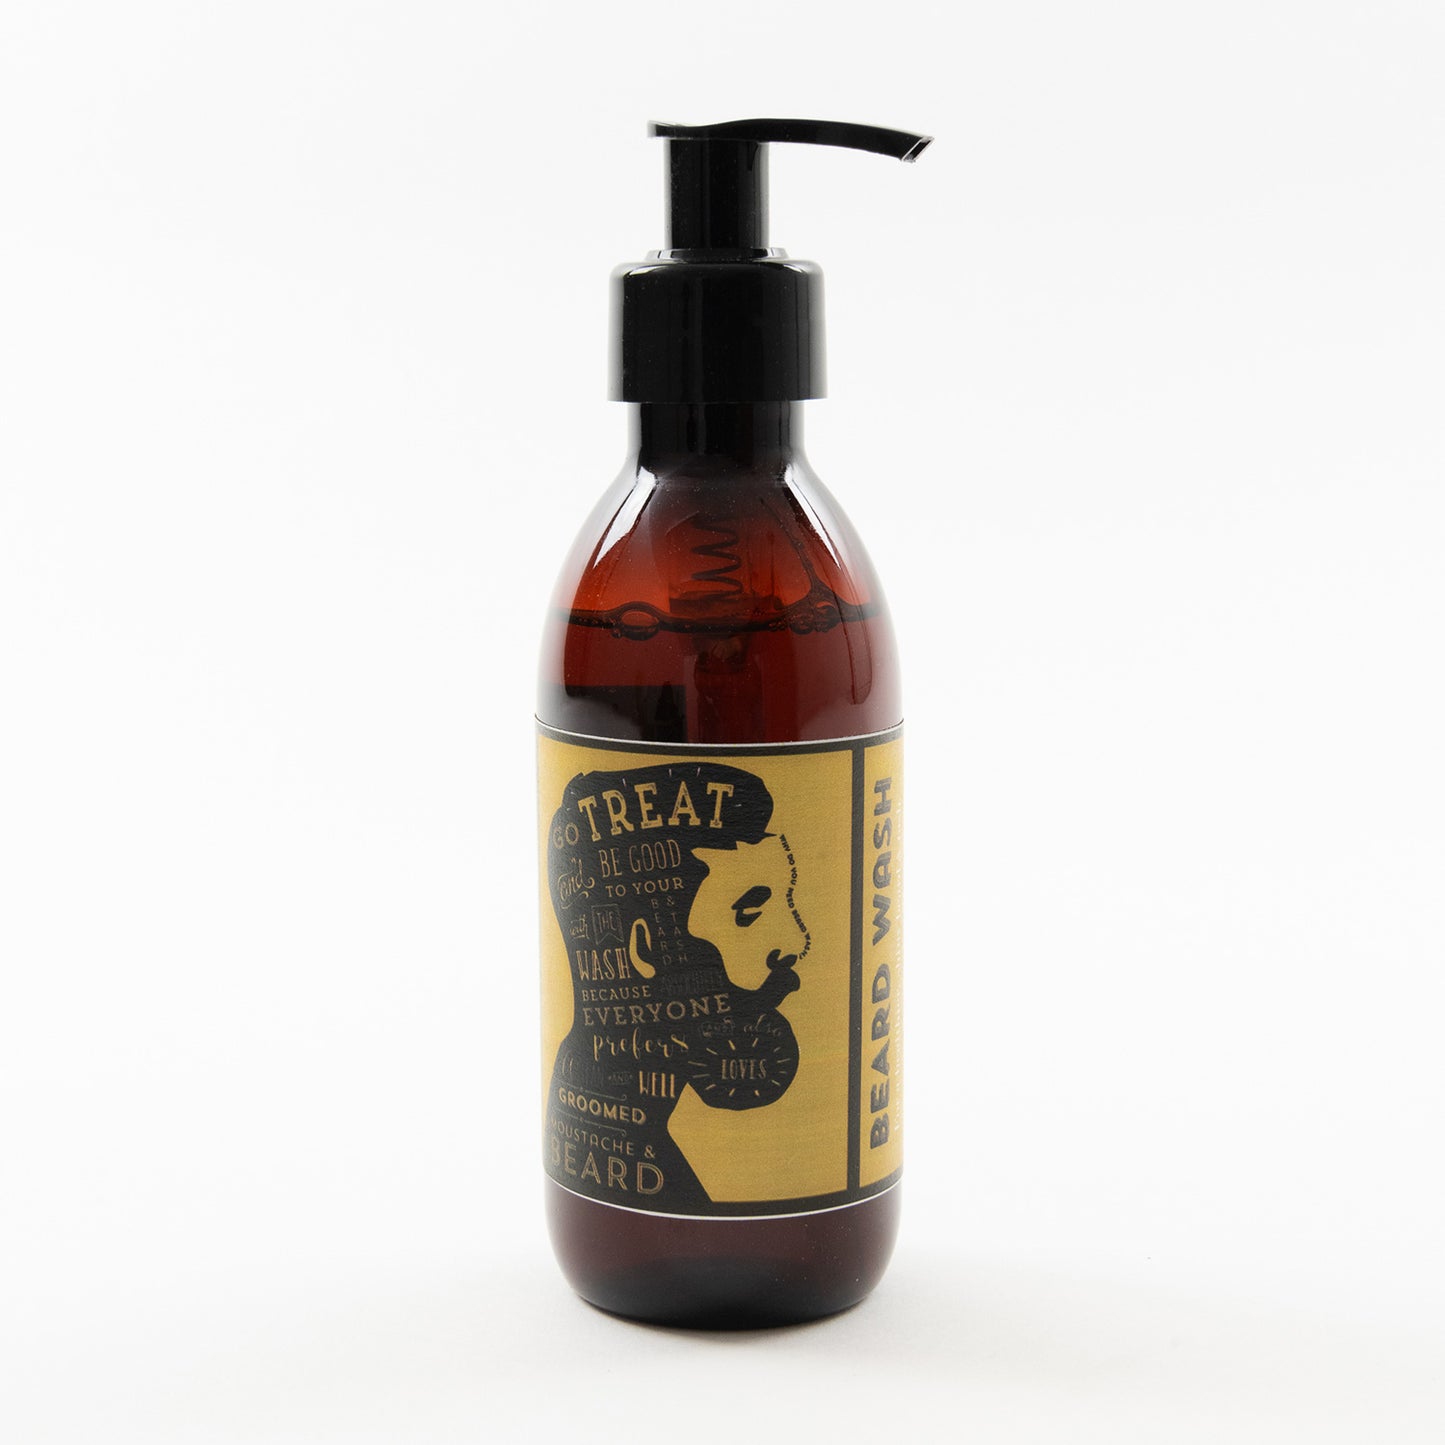 A bottle of beard wash pictured on a white background. It's a dark brown bottle with a white and yellow label. The label features an illustration of a man's face in profile with a large beard.